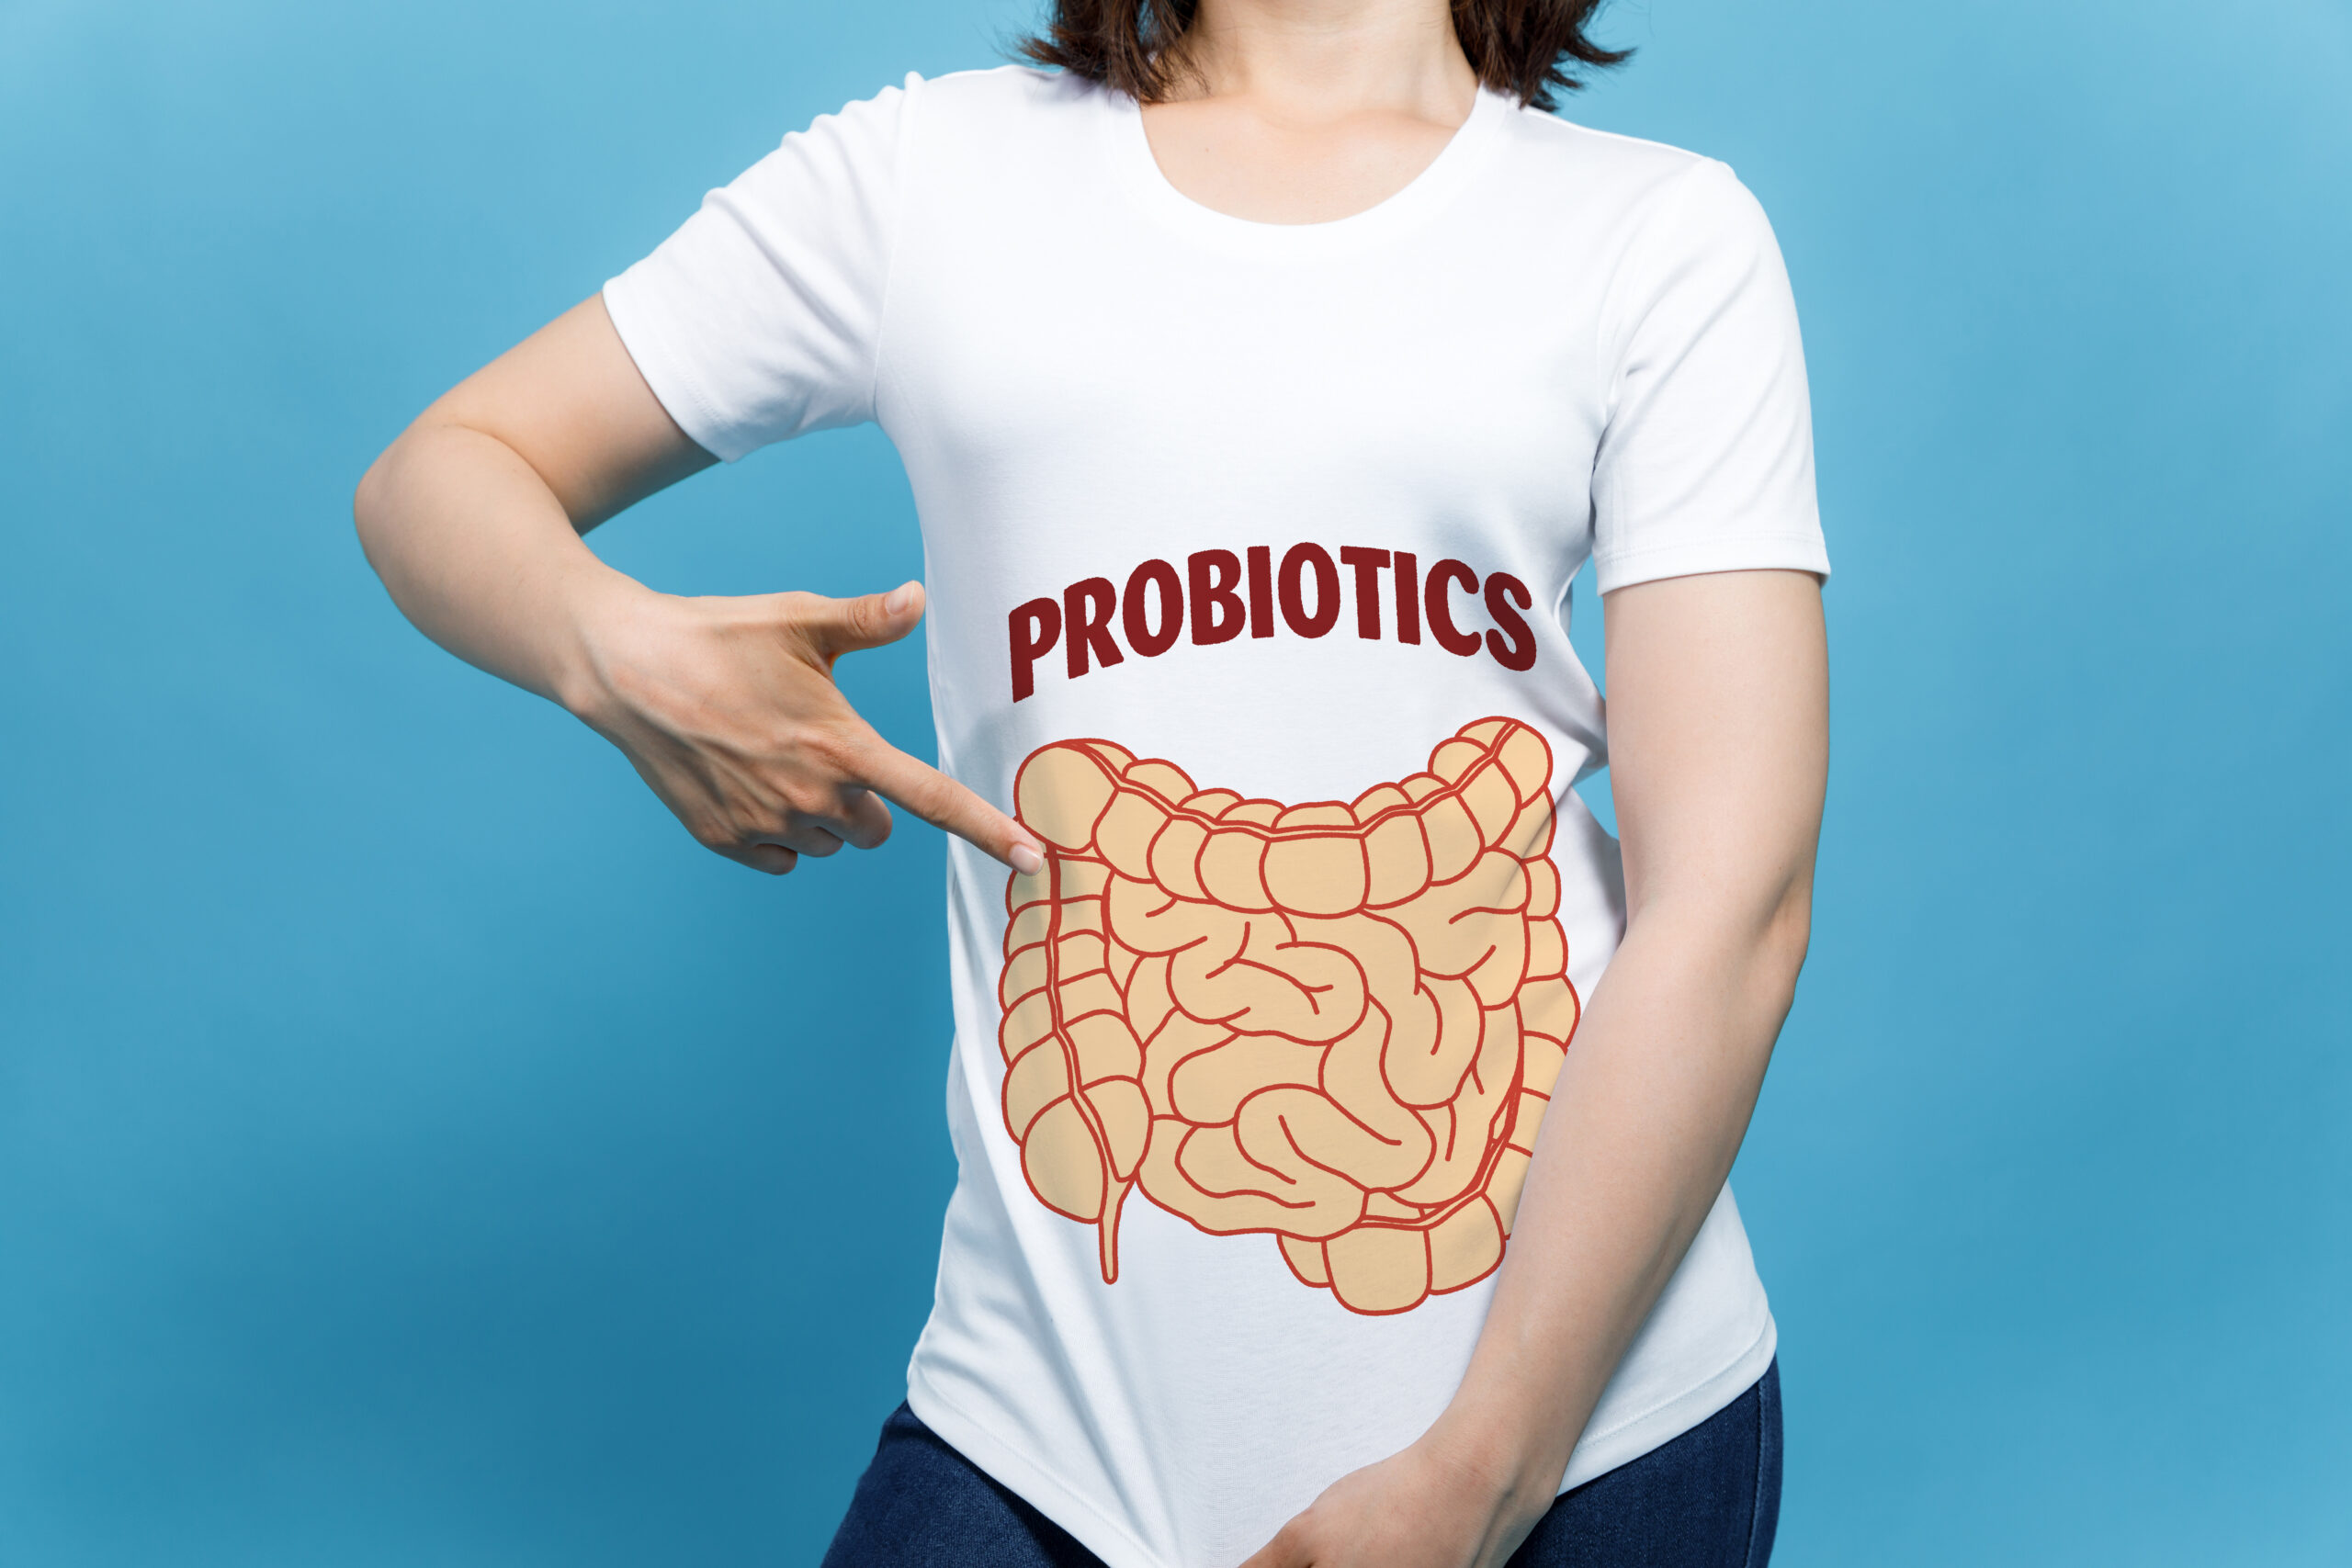 Probiotic 'backpacks' show promise for treating inflammatory bowel diseases